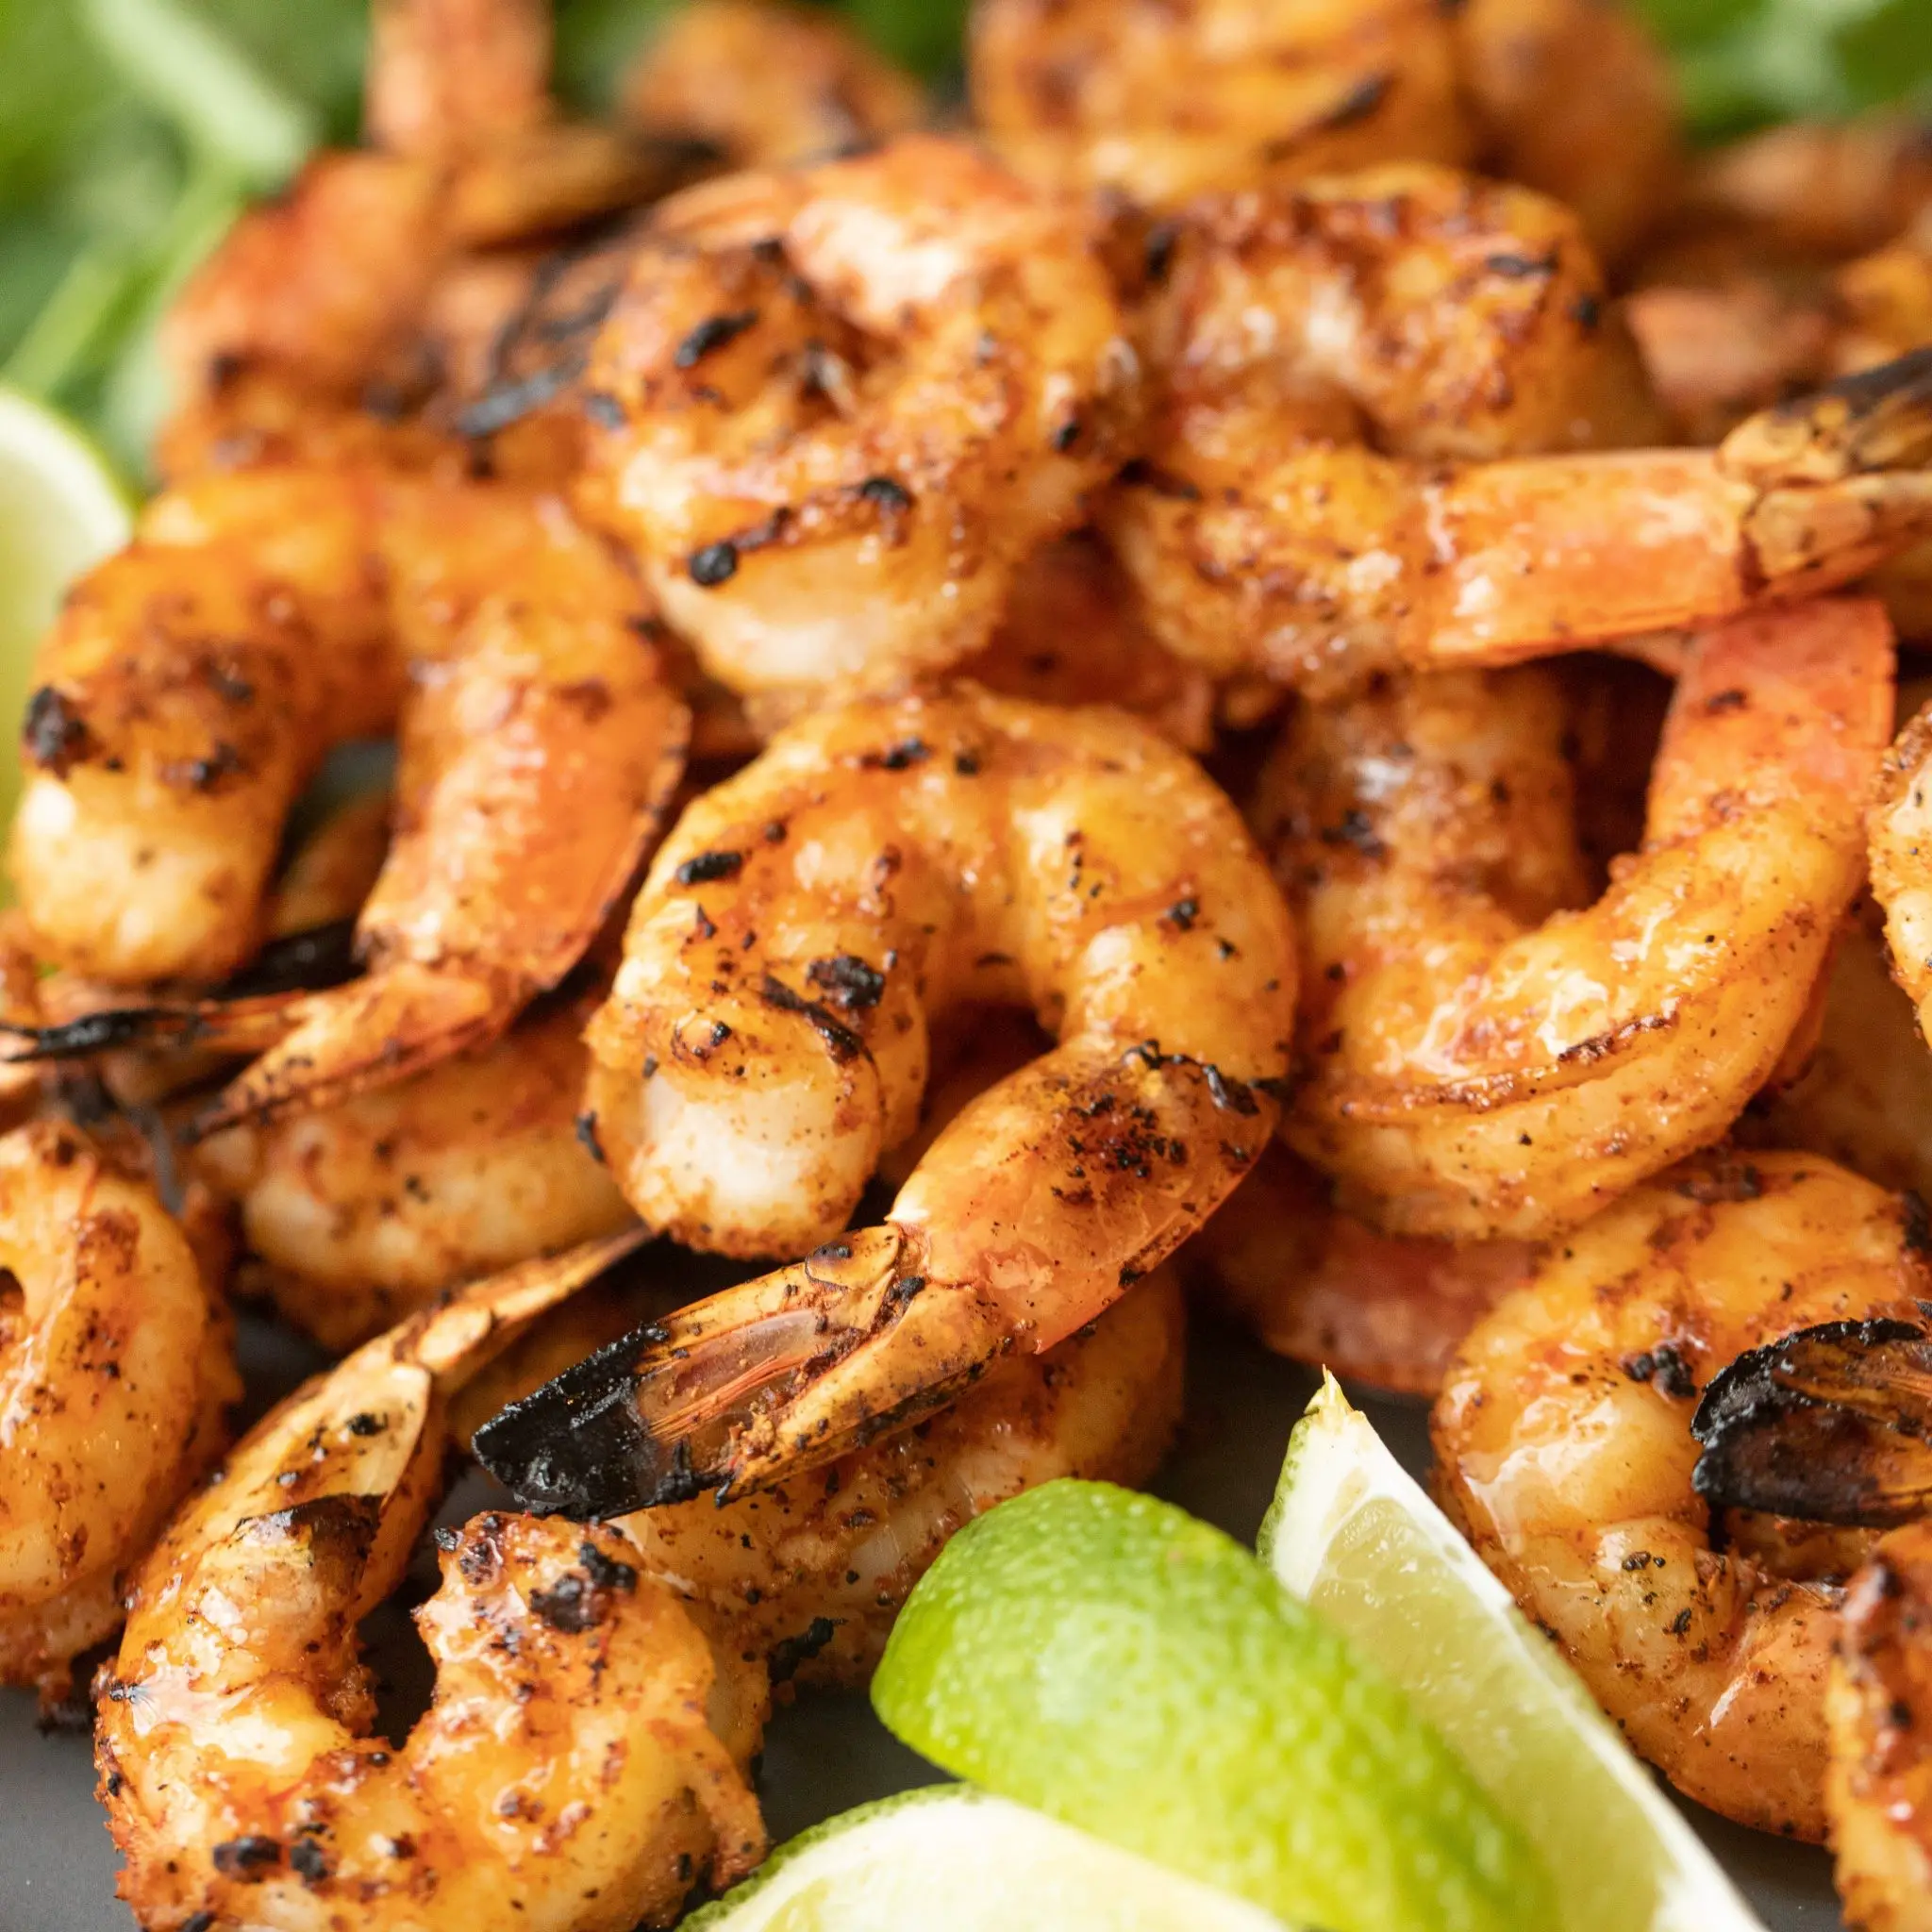 Grilled Shrimp with a Chili Lime Rub